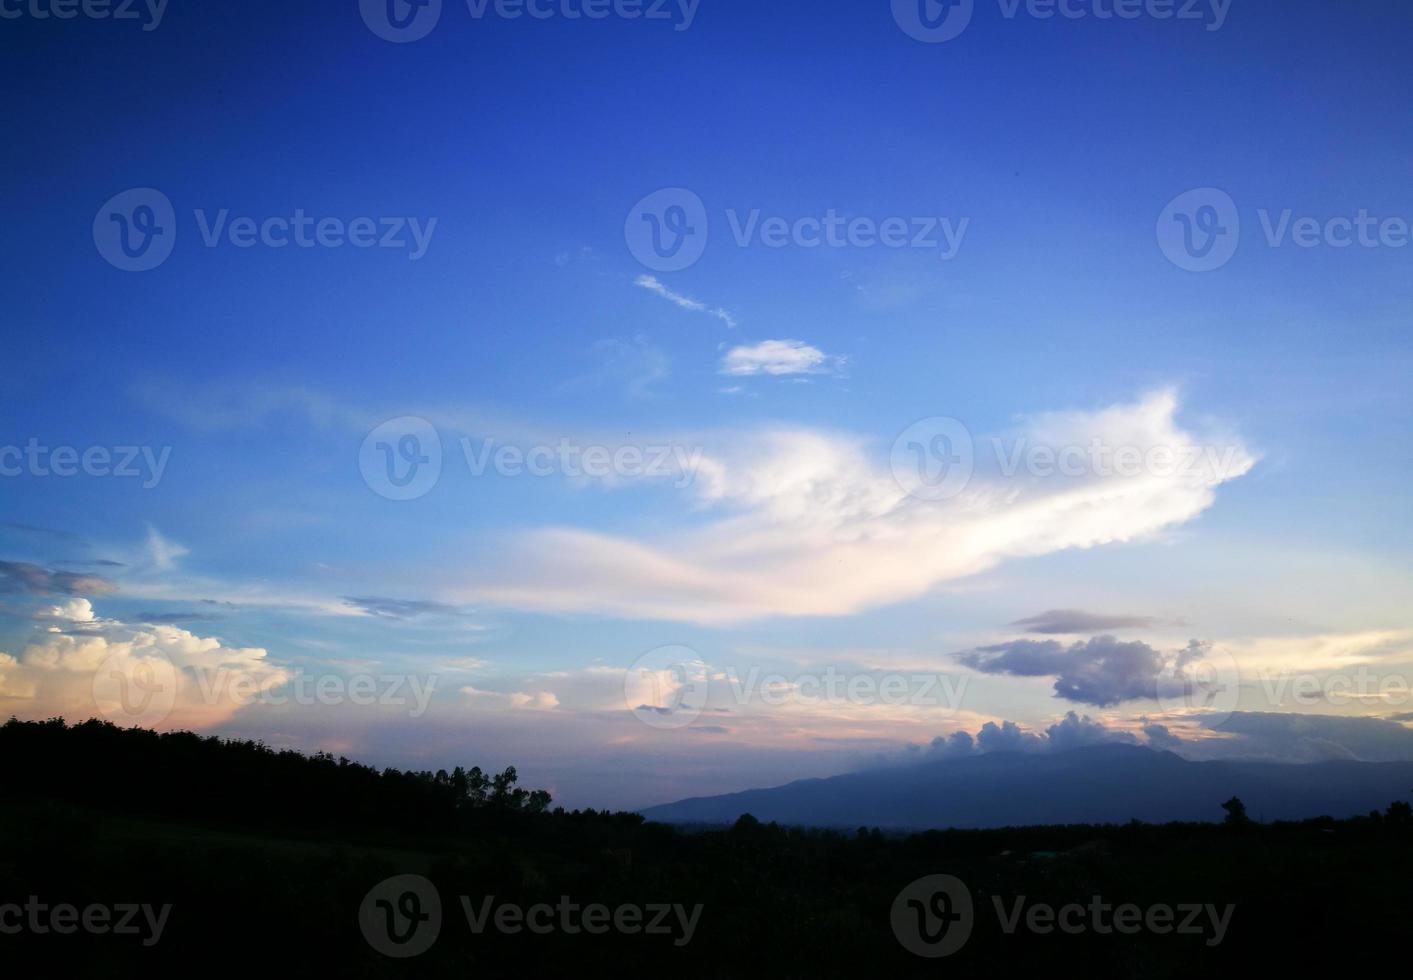 Blue sky with clouds, blue sky background. photo